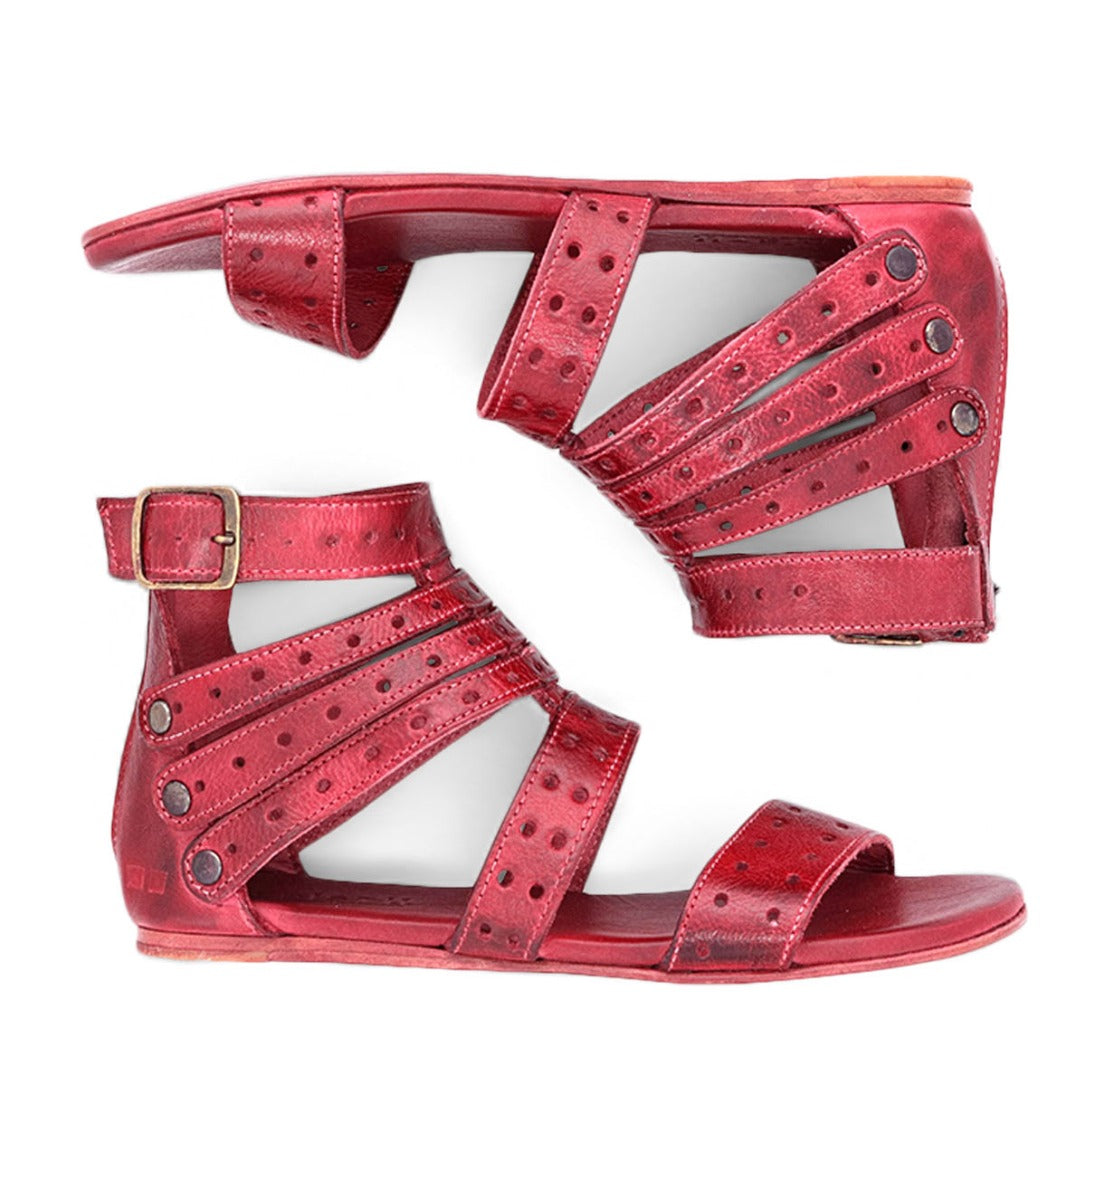 A pair of Bed Stu Artemis M red sandals with straps and buckles.